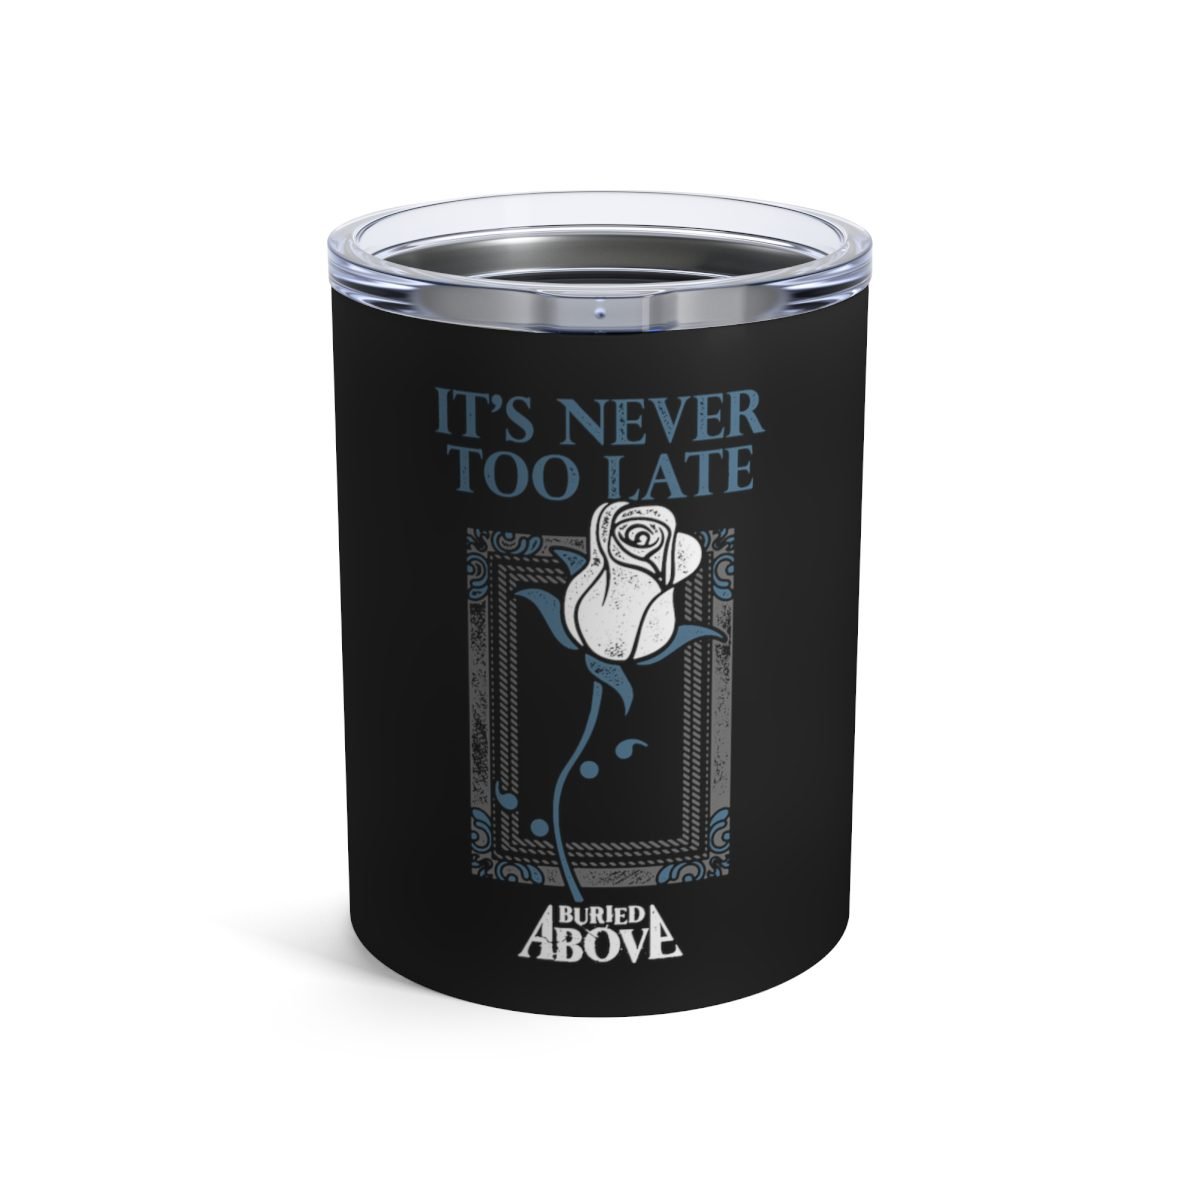 Buried Above – It’s Never Too Late Tumbler 10oz